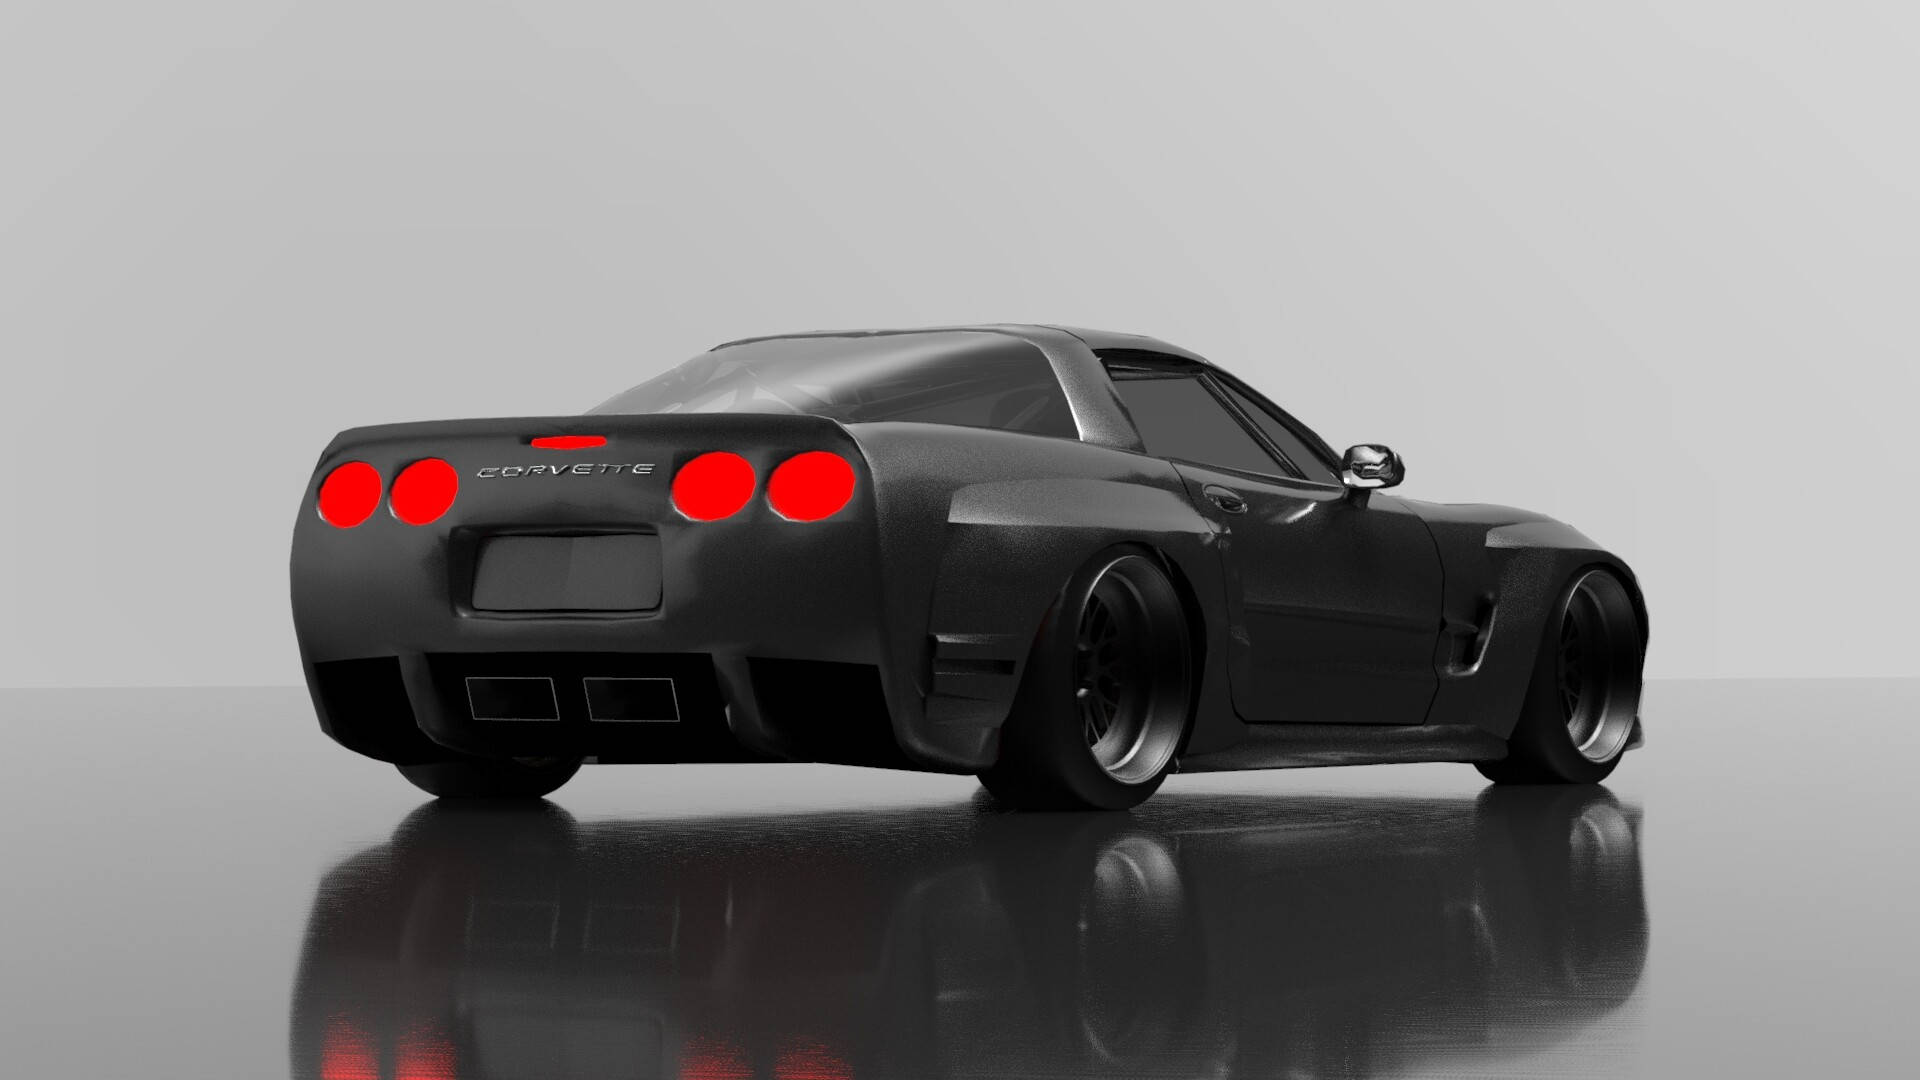 Sophistication And Power - The Black C4 Corvette Background